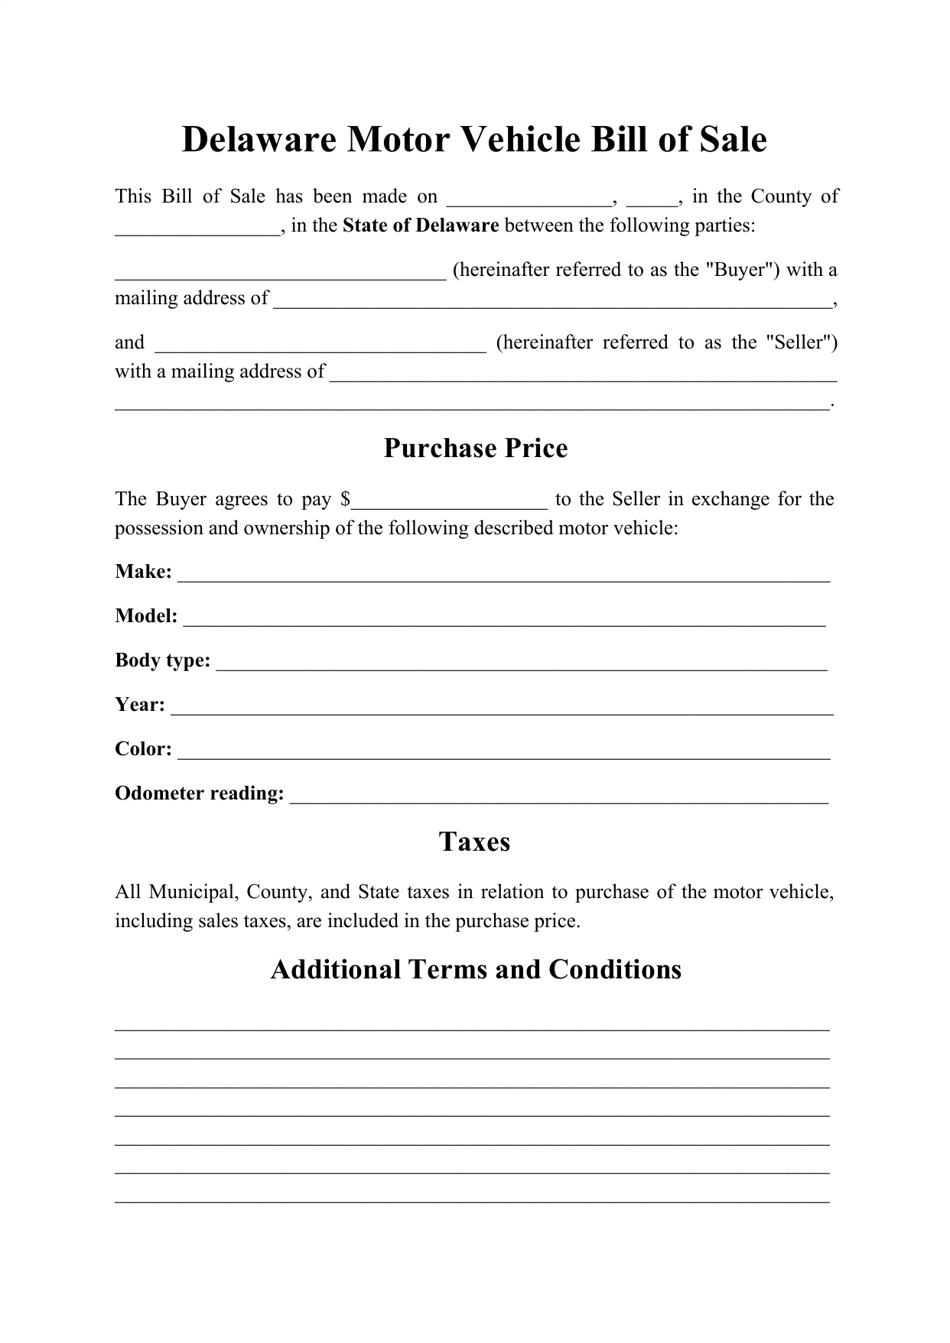 free motorcycle bill of sale form pdf free motorcycle bill of sale